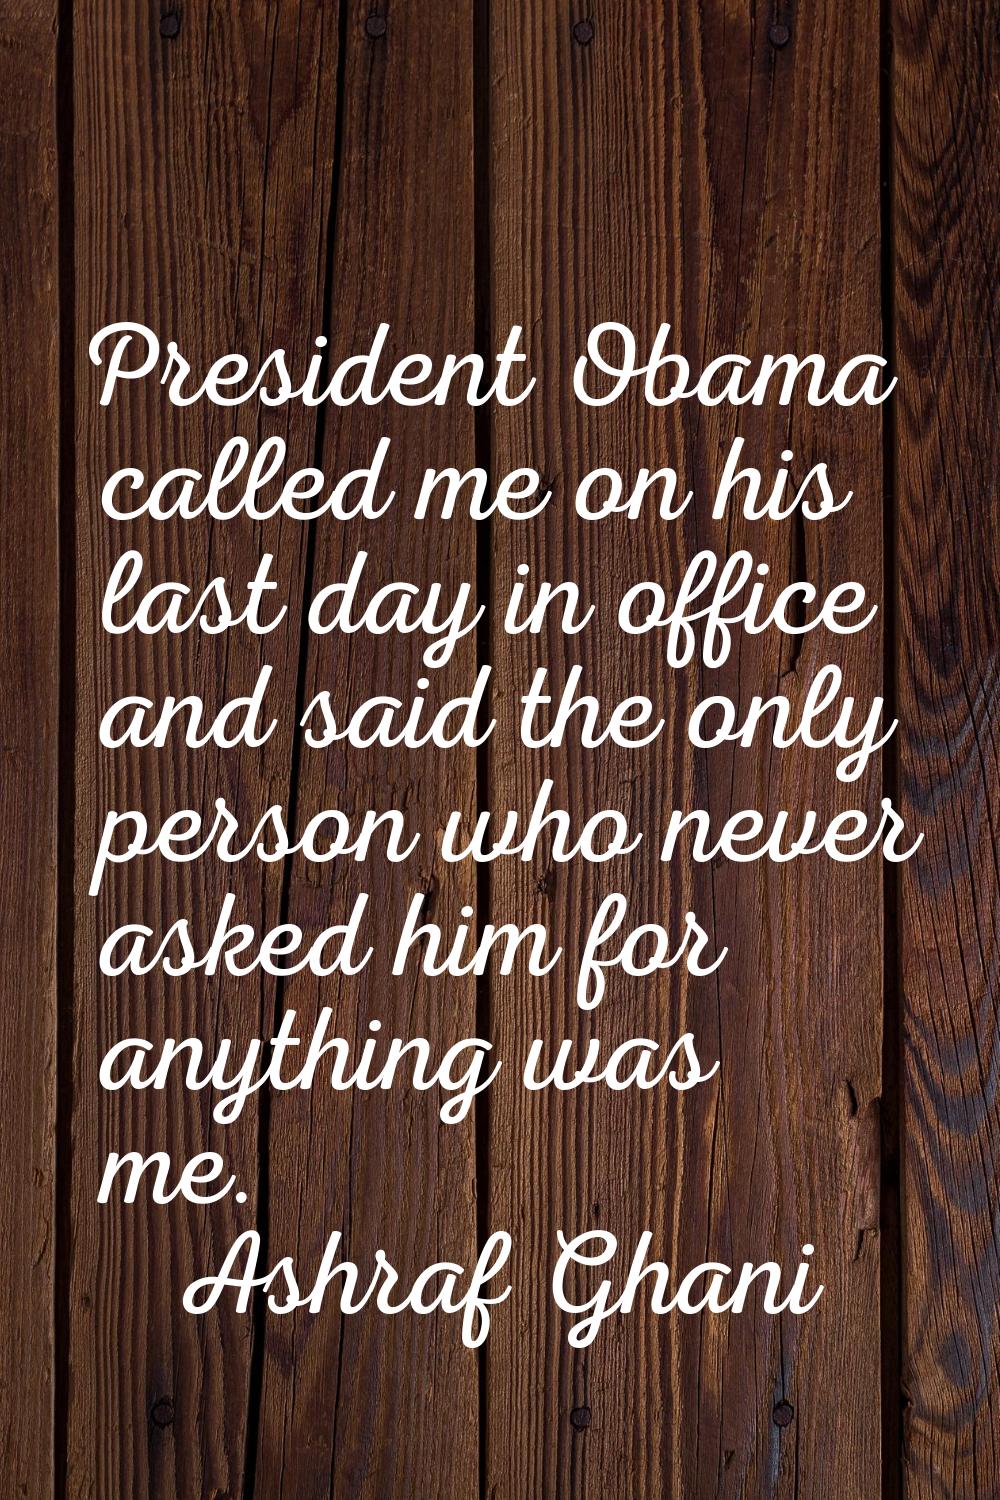 President Obama called me on his last day in office and said the only person who never asked him fo